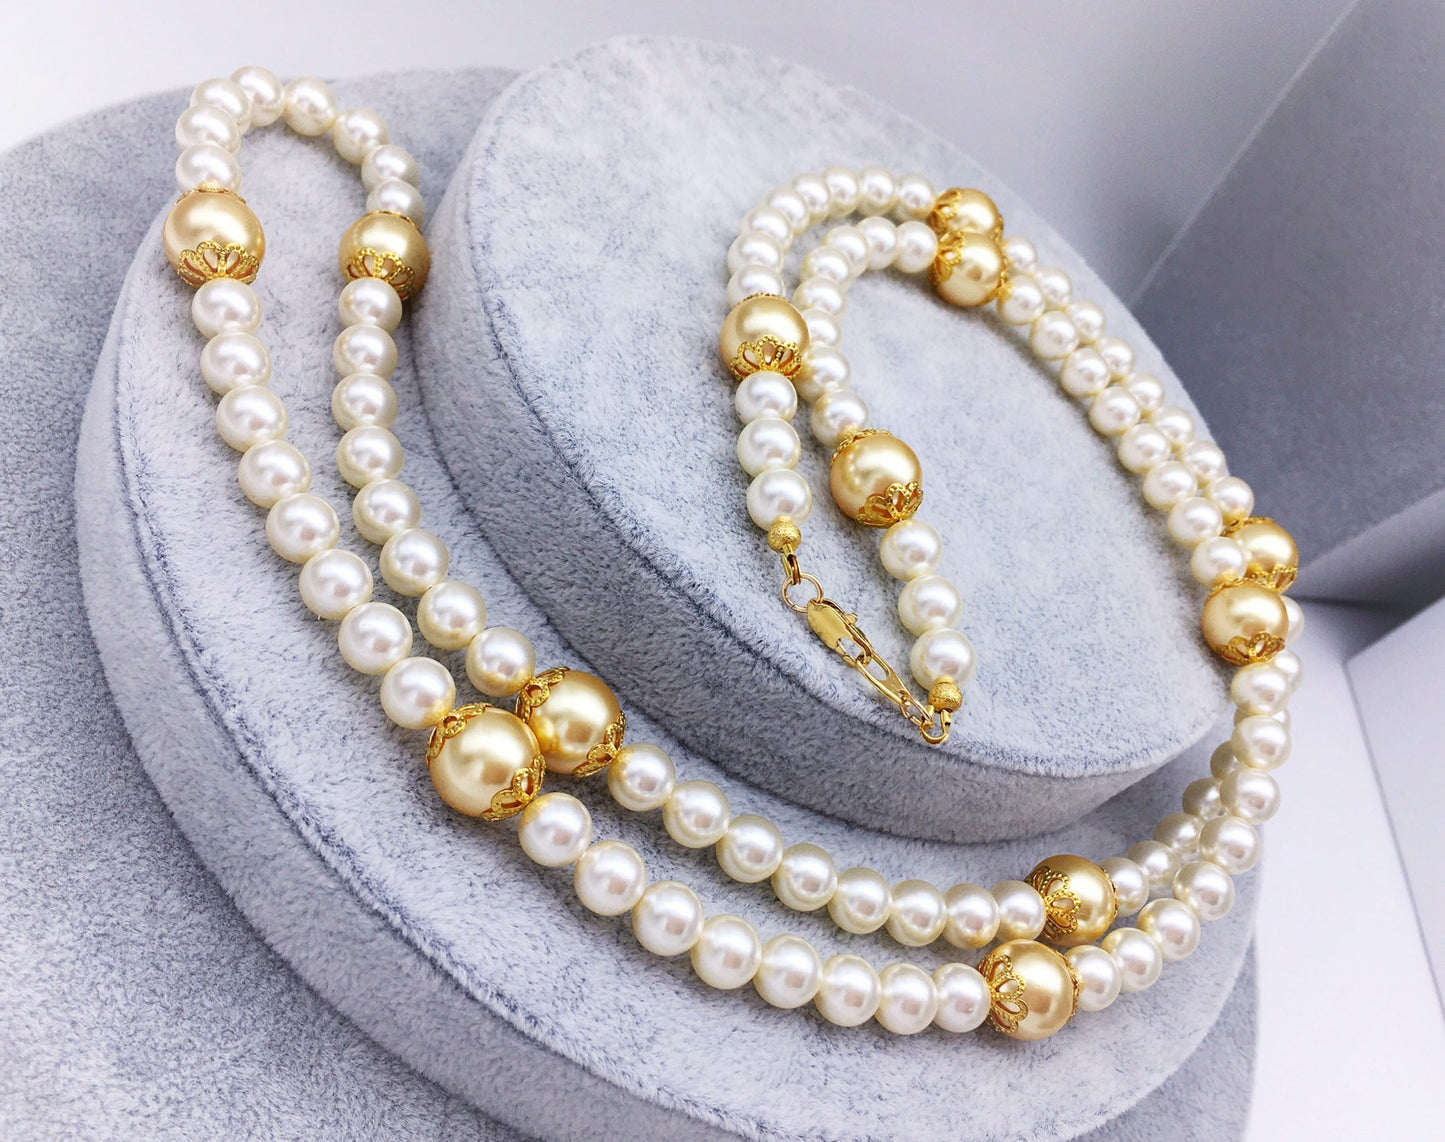 Anastasia String of Pearls Necklace